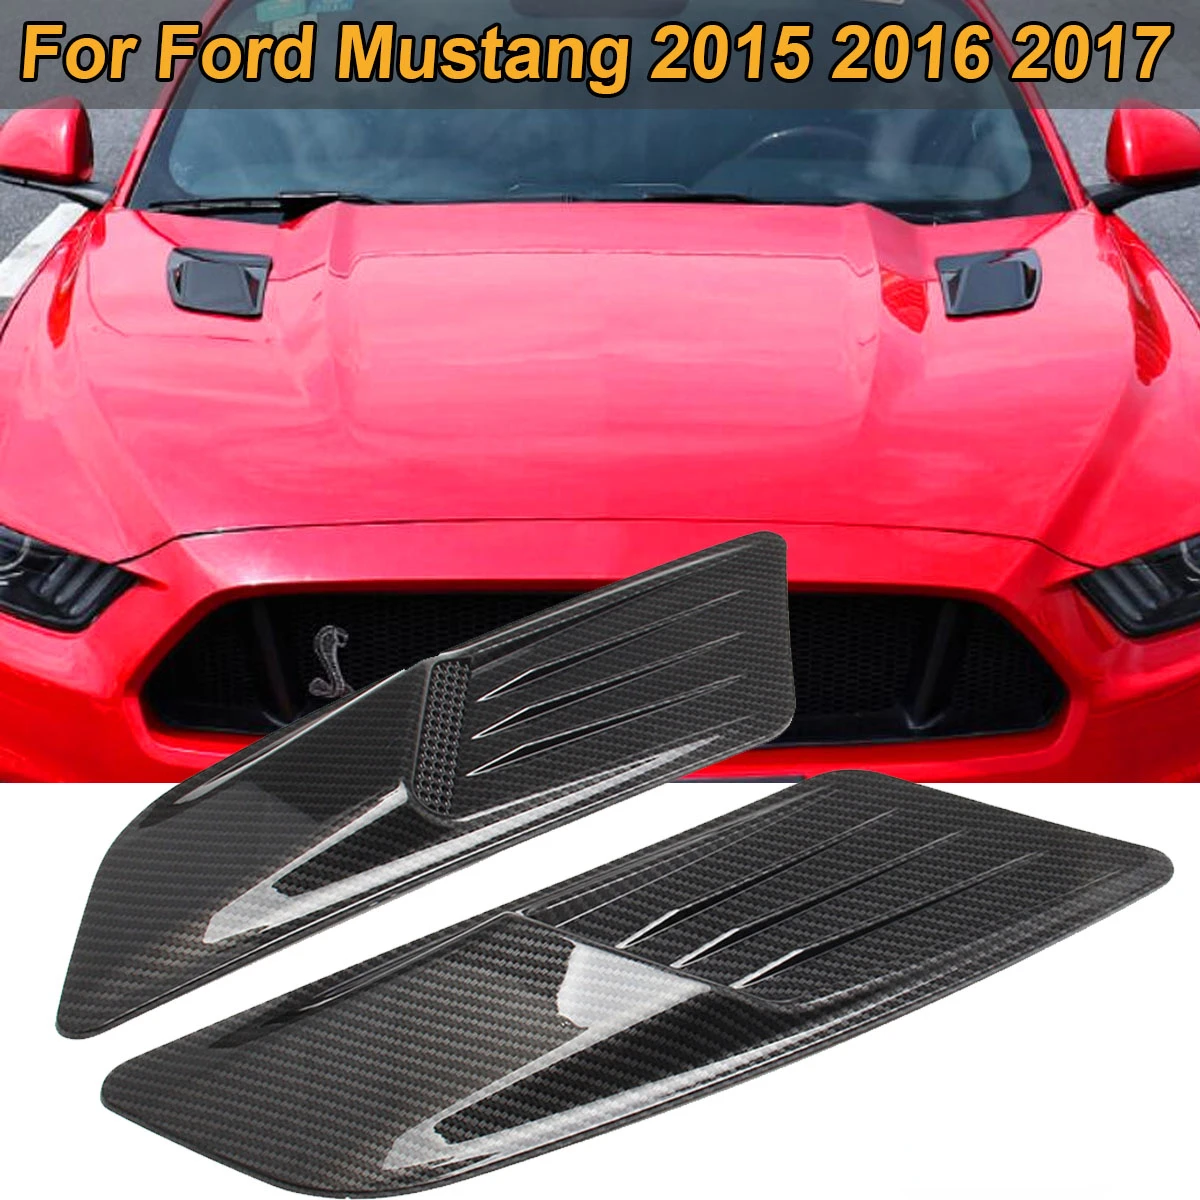 

Front Engine Hood Air Flow Intake Scoop Bonnet Vent Cover Trim for Ford Mustang 2015 2016 2017 Decoration ONLY Car Accessories